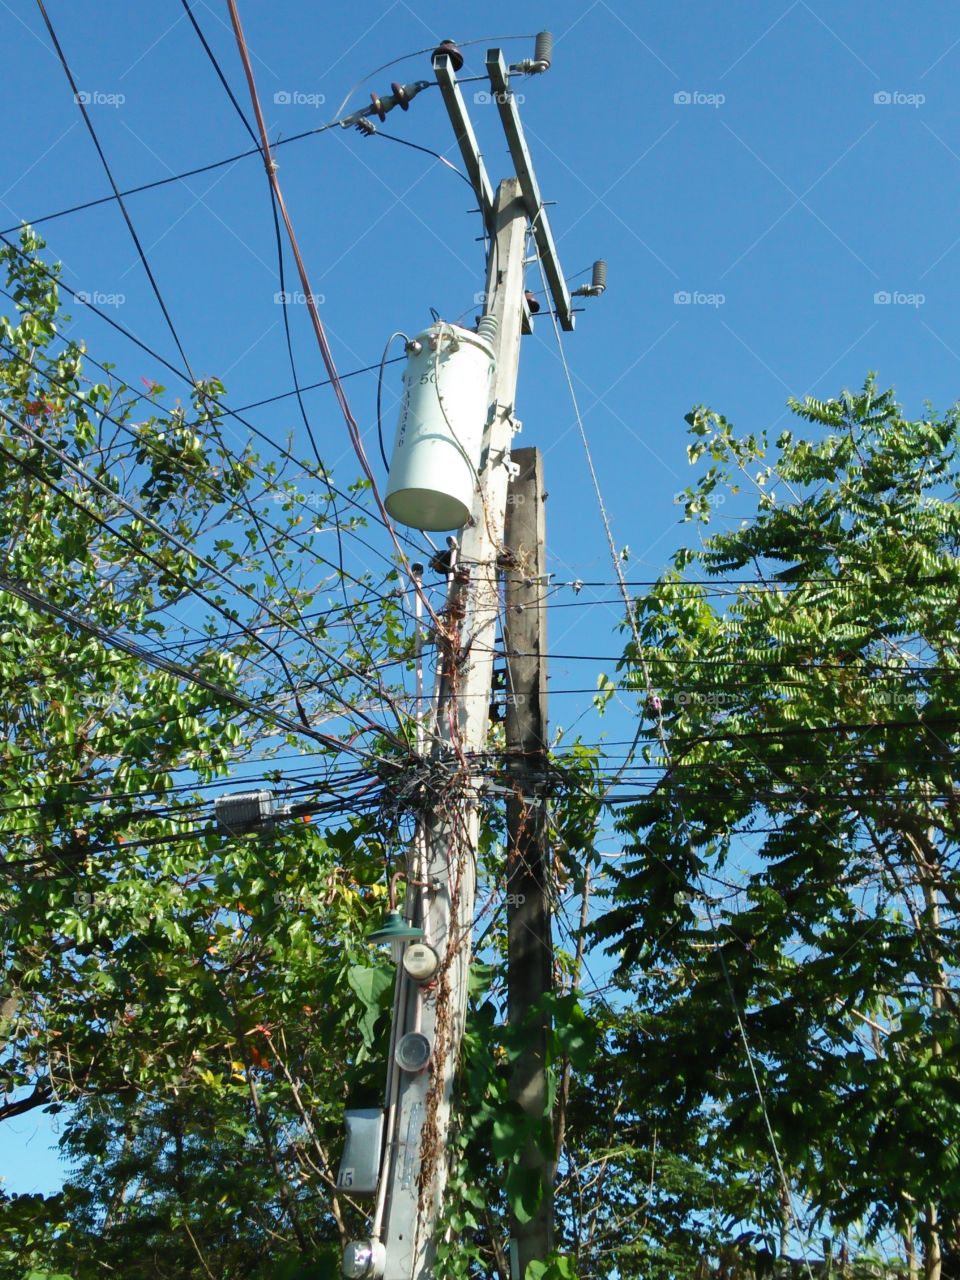 electricity post